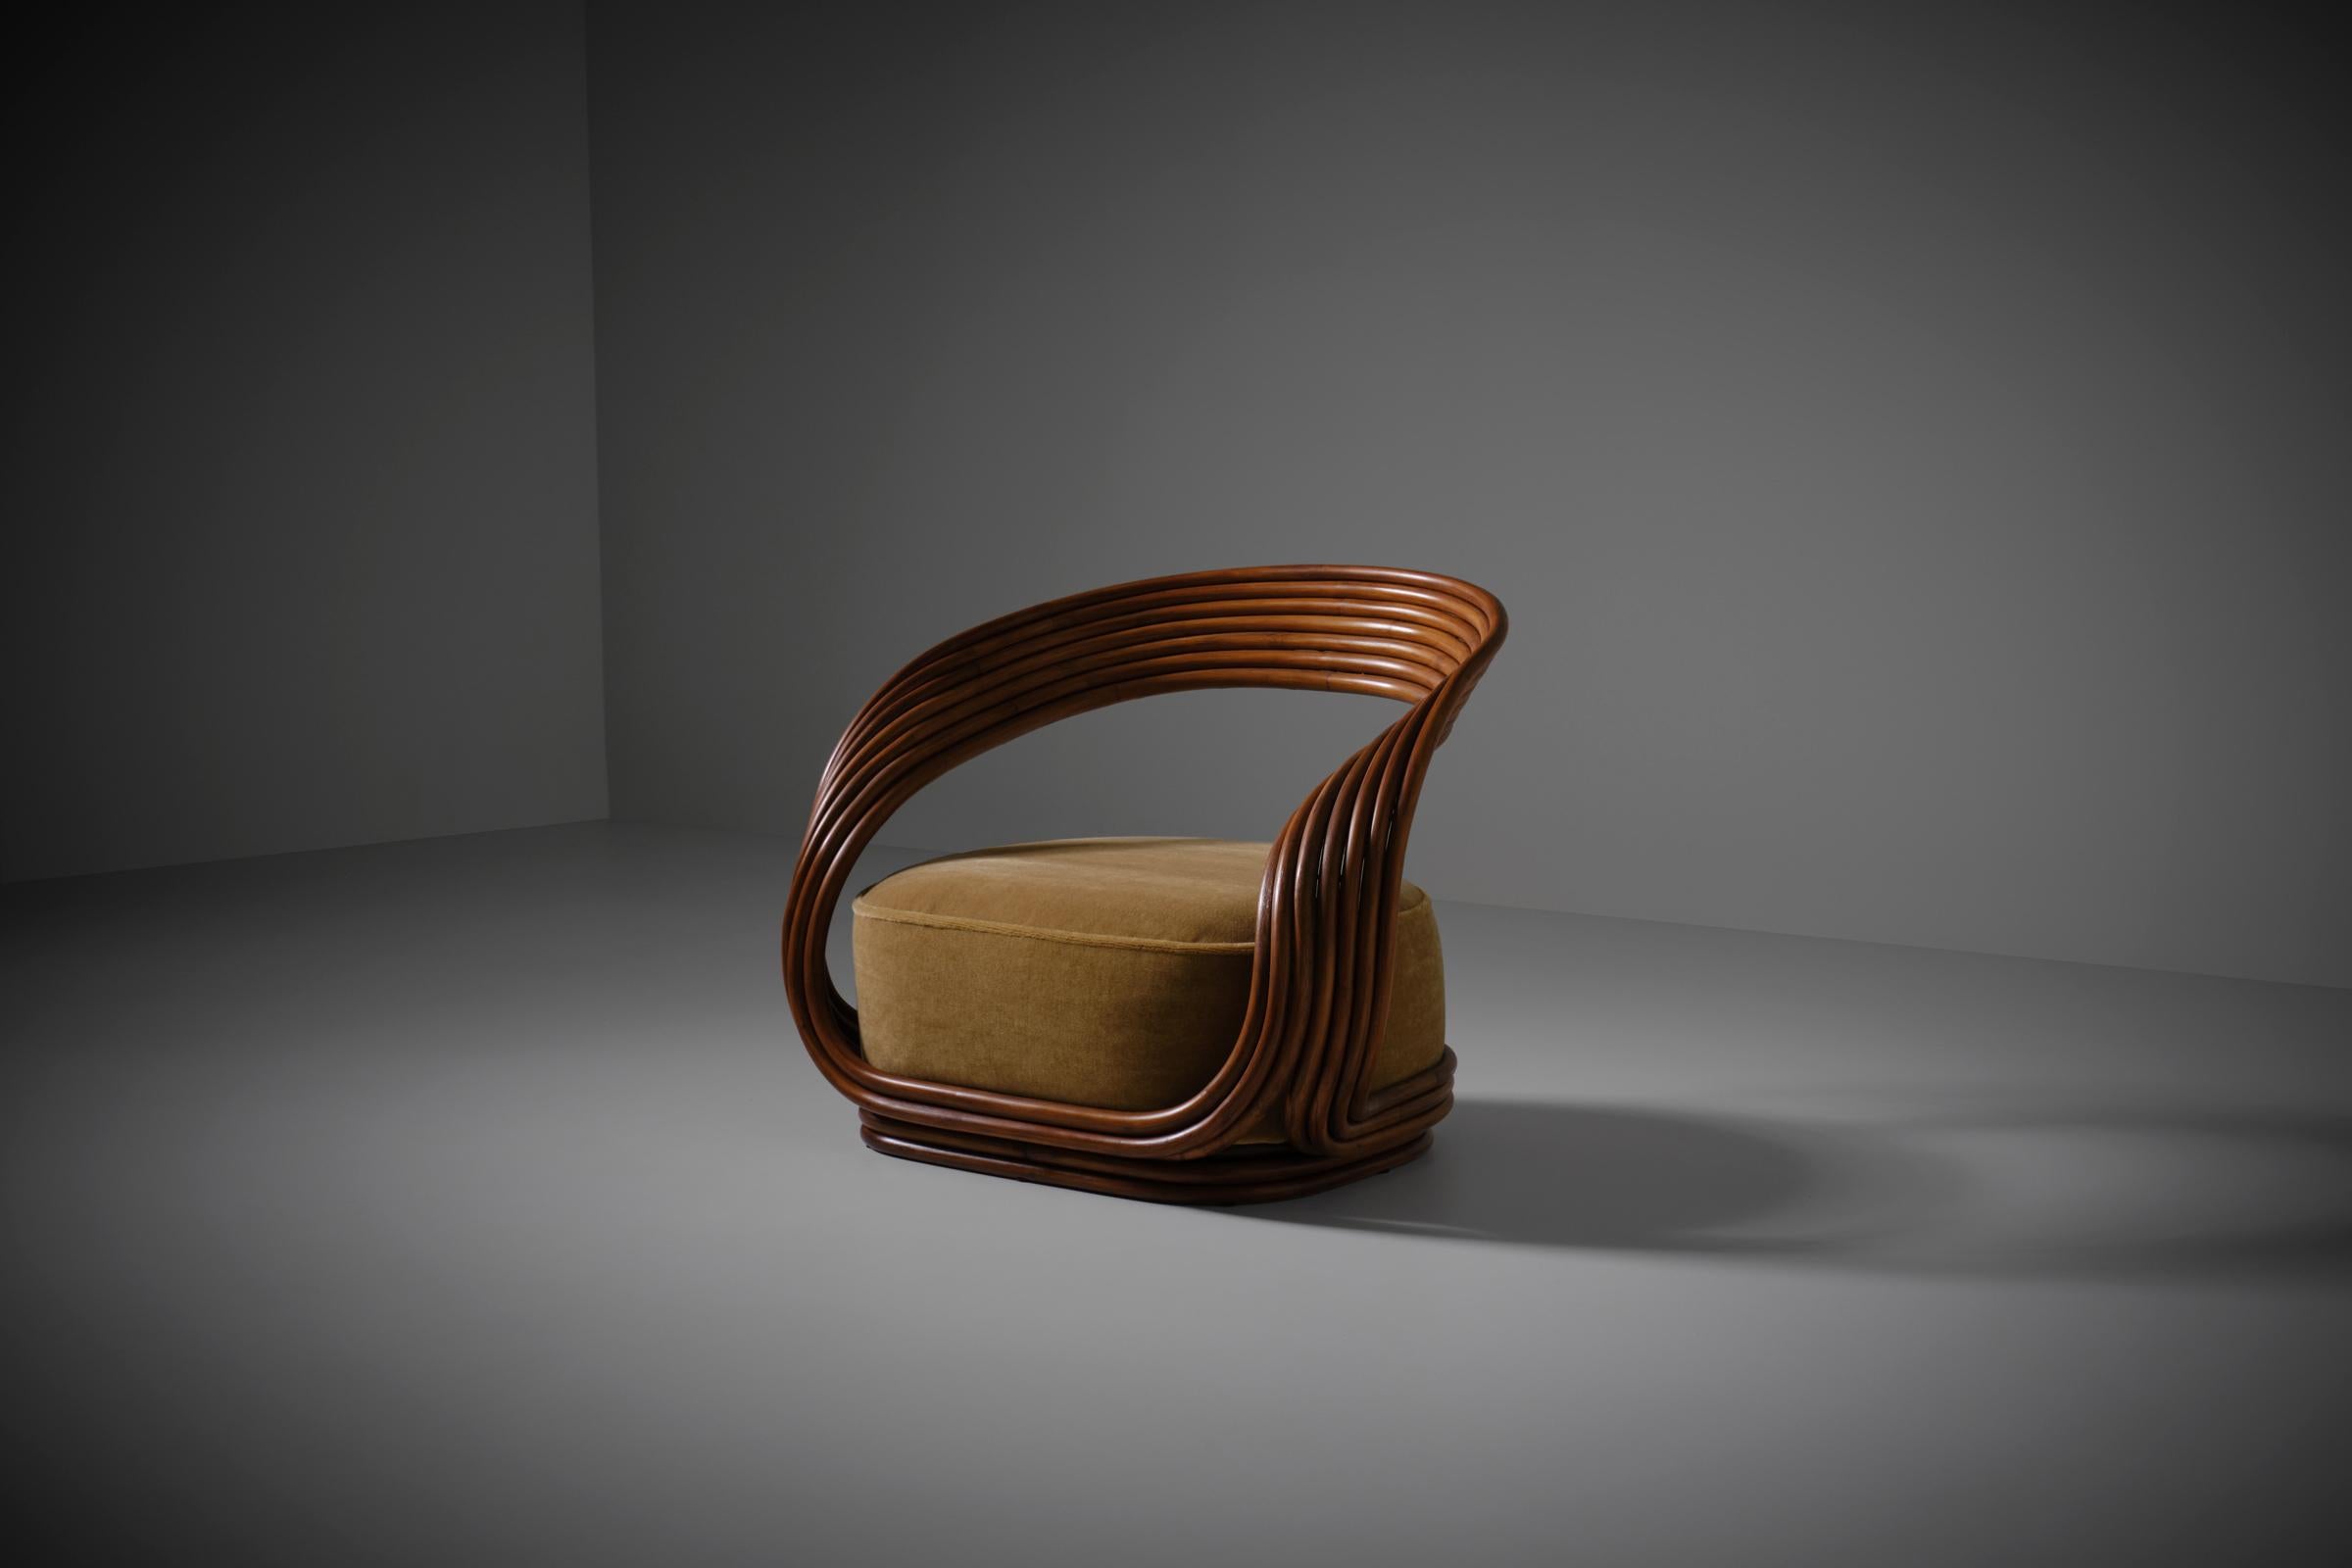 Original Eva armchair by Giovanni Travasa for Vittorio Bonacina, Italy, 1965. Beautiful sculptural bent bamboo frame which are shaped together like ribbons with a large cushioned seat. The old model is different from the newer production, the old